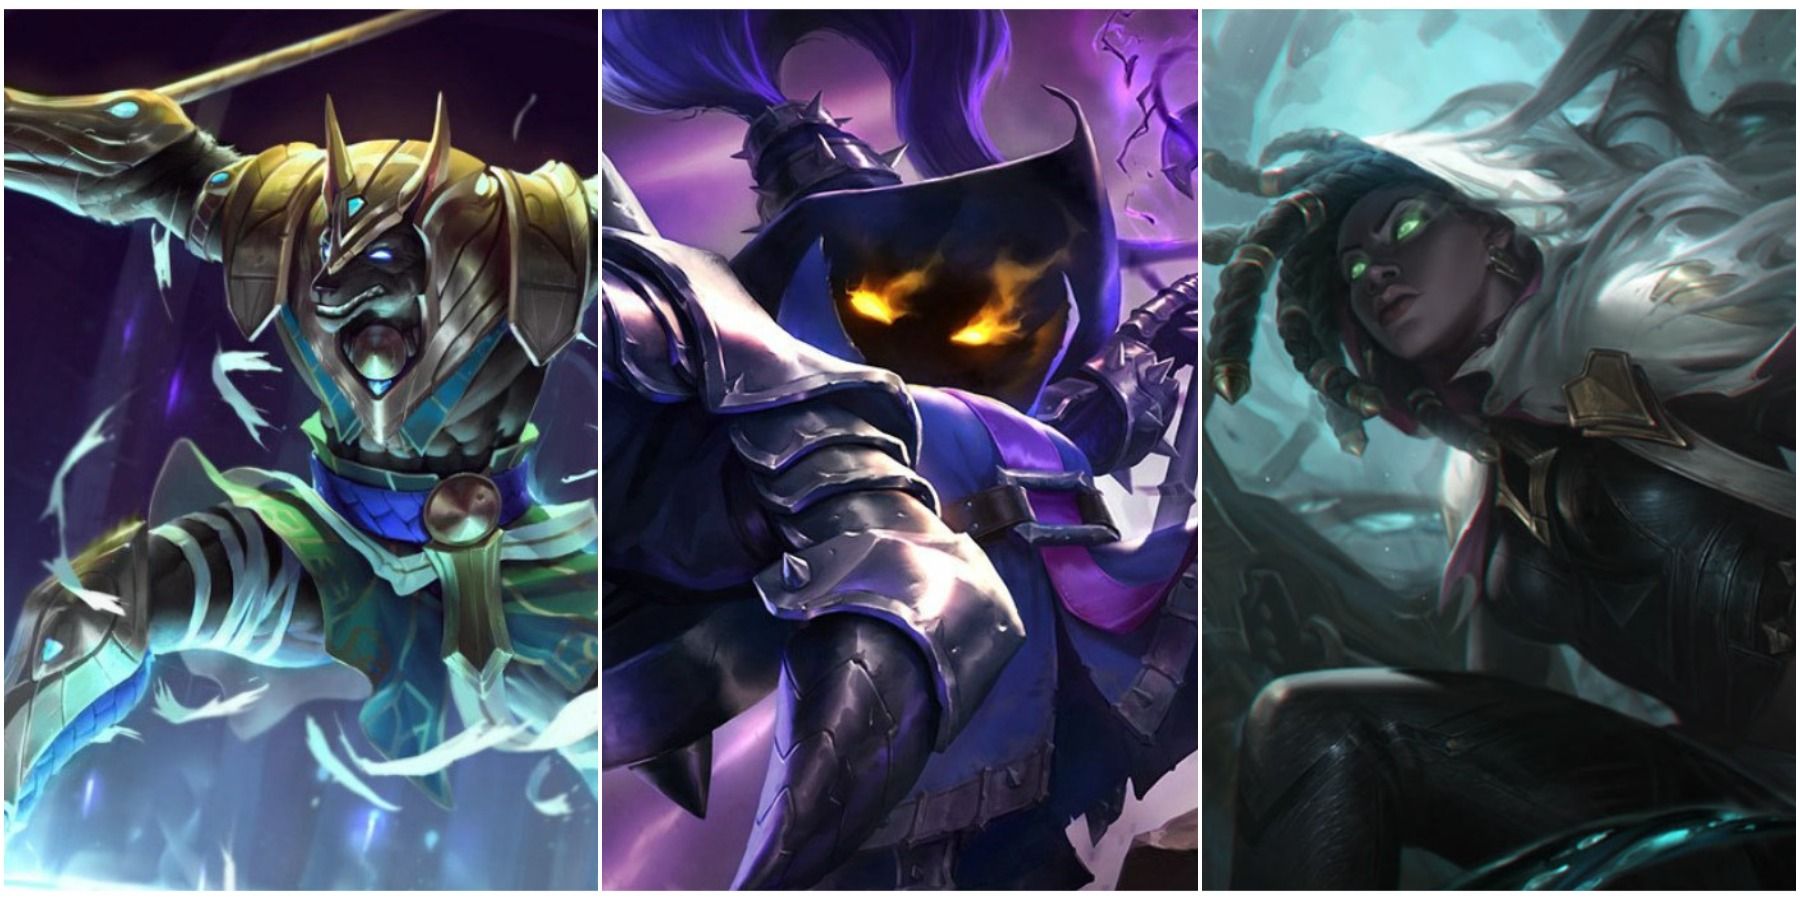 League of Legends characters: the best LoL champions for beginners